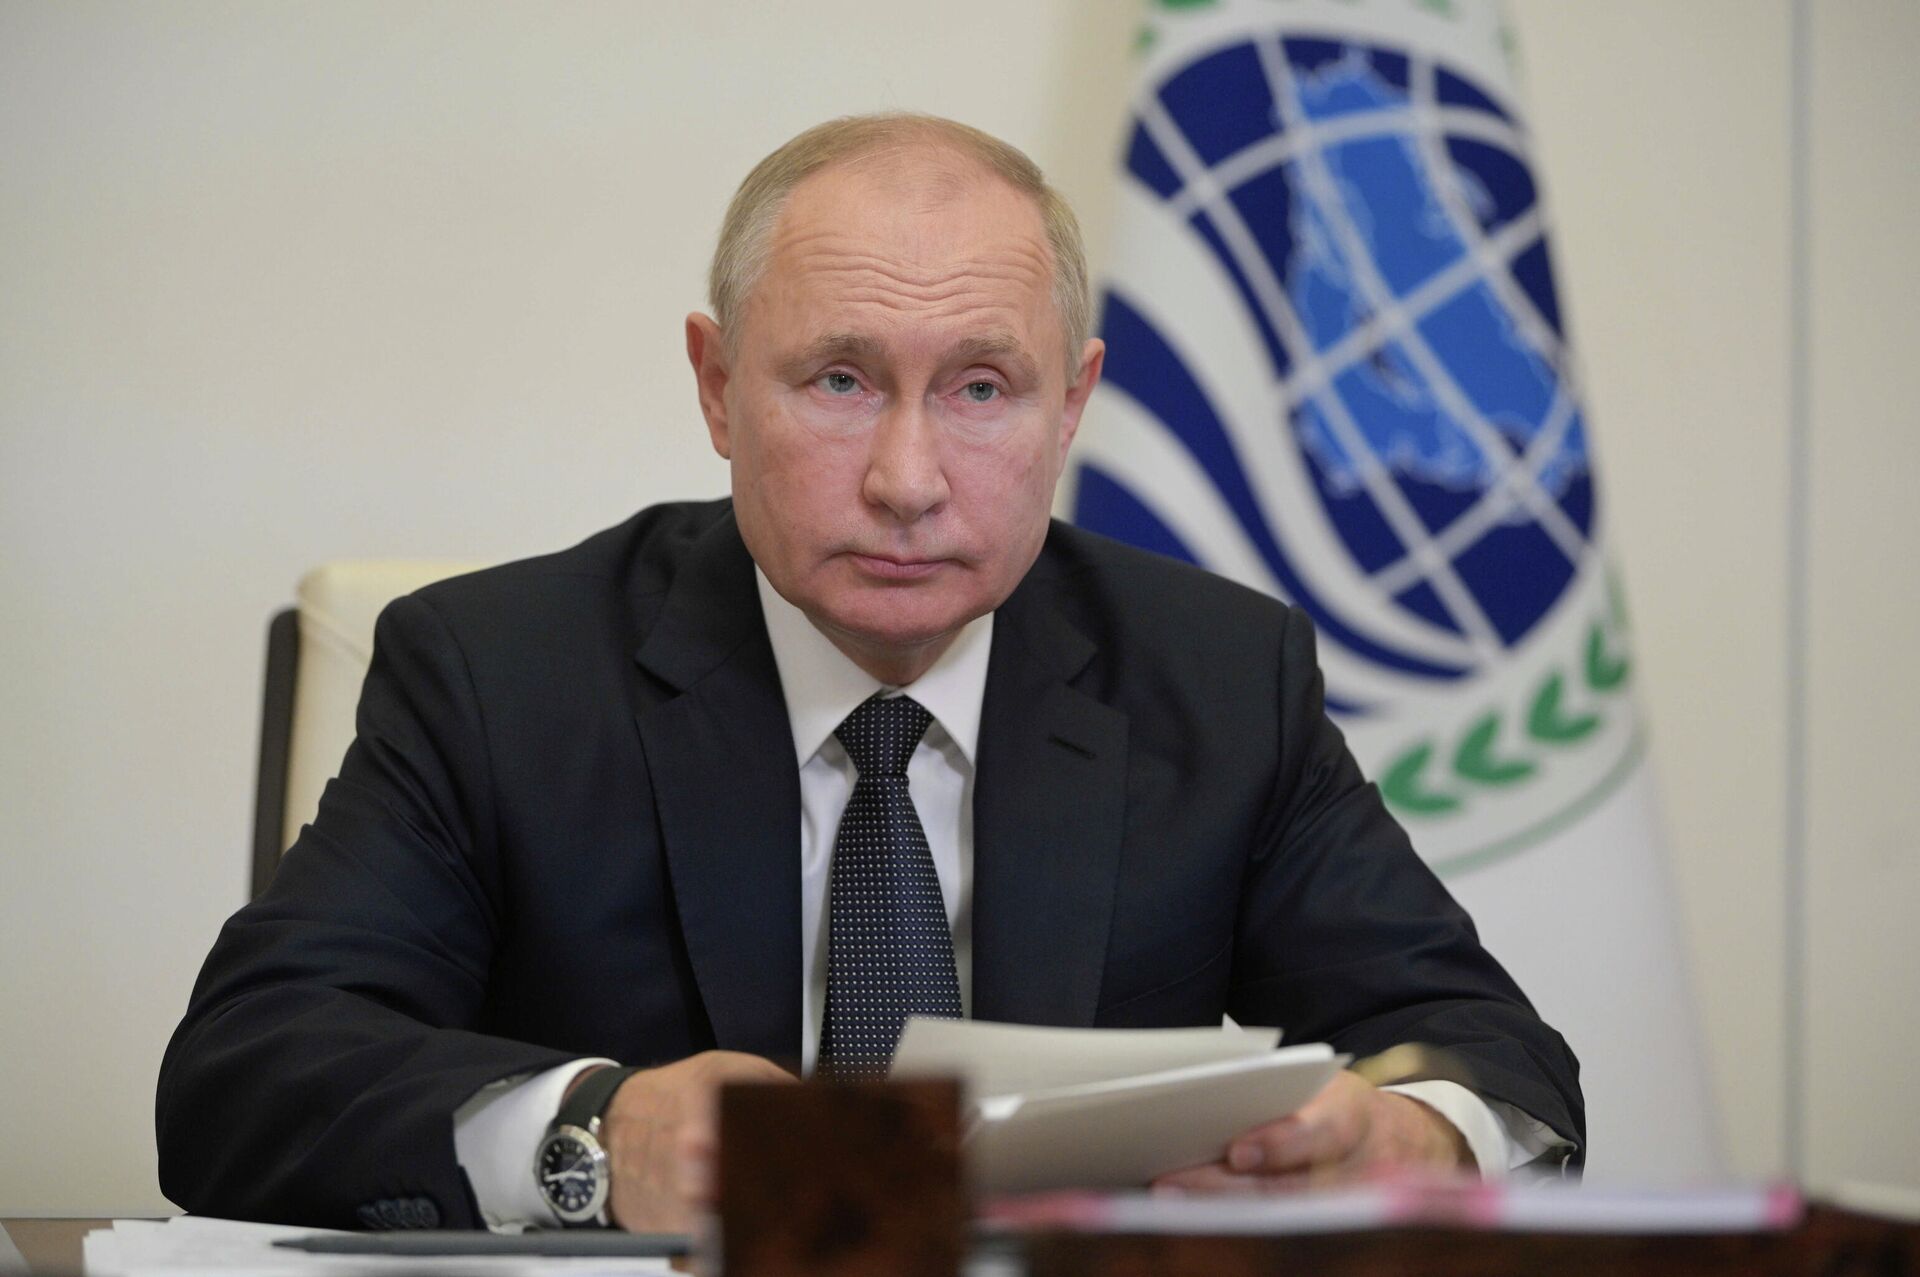 Russian President Vladimir Putin attends a meeting of the Council of Heads of State of the Shanghai Cooperation Organisation (SCO) held in Dushanbe, via videoconference, at the Novo-Ogaryovo state residence, outside Moscow, Russia - Sputnik International, 1920, 17.09.2021